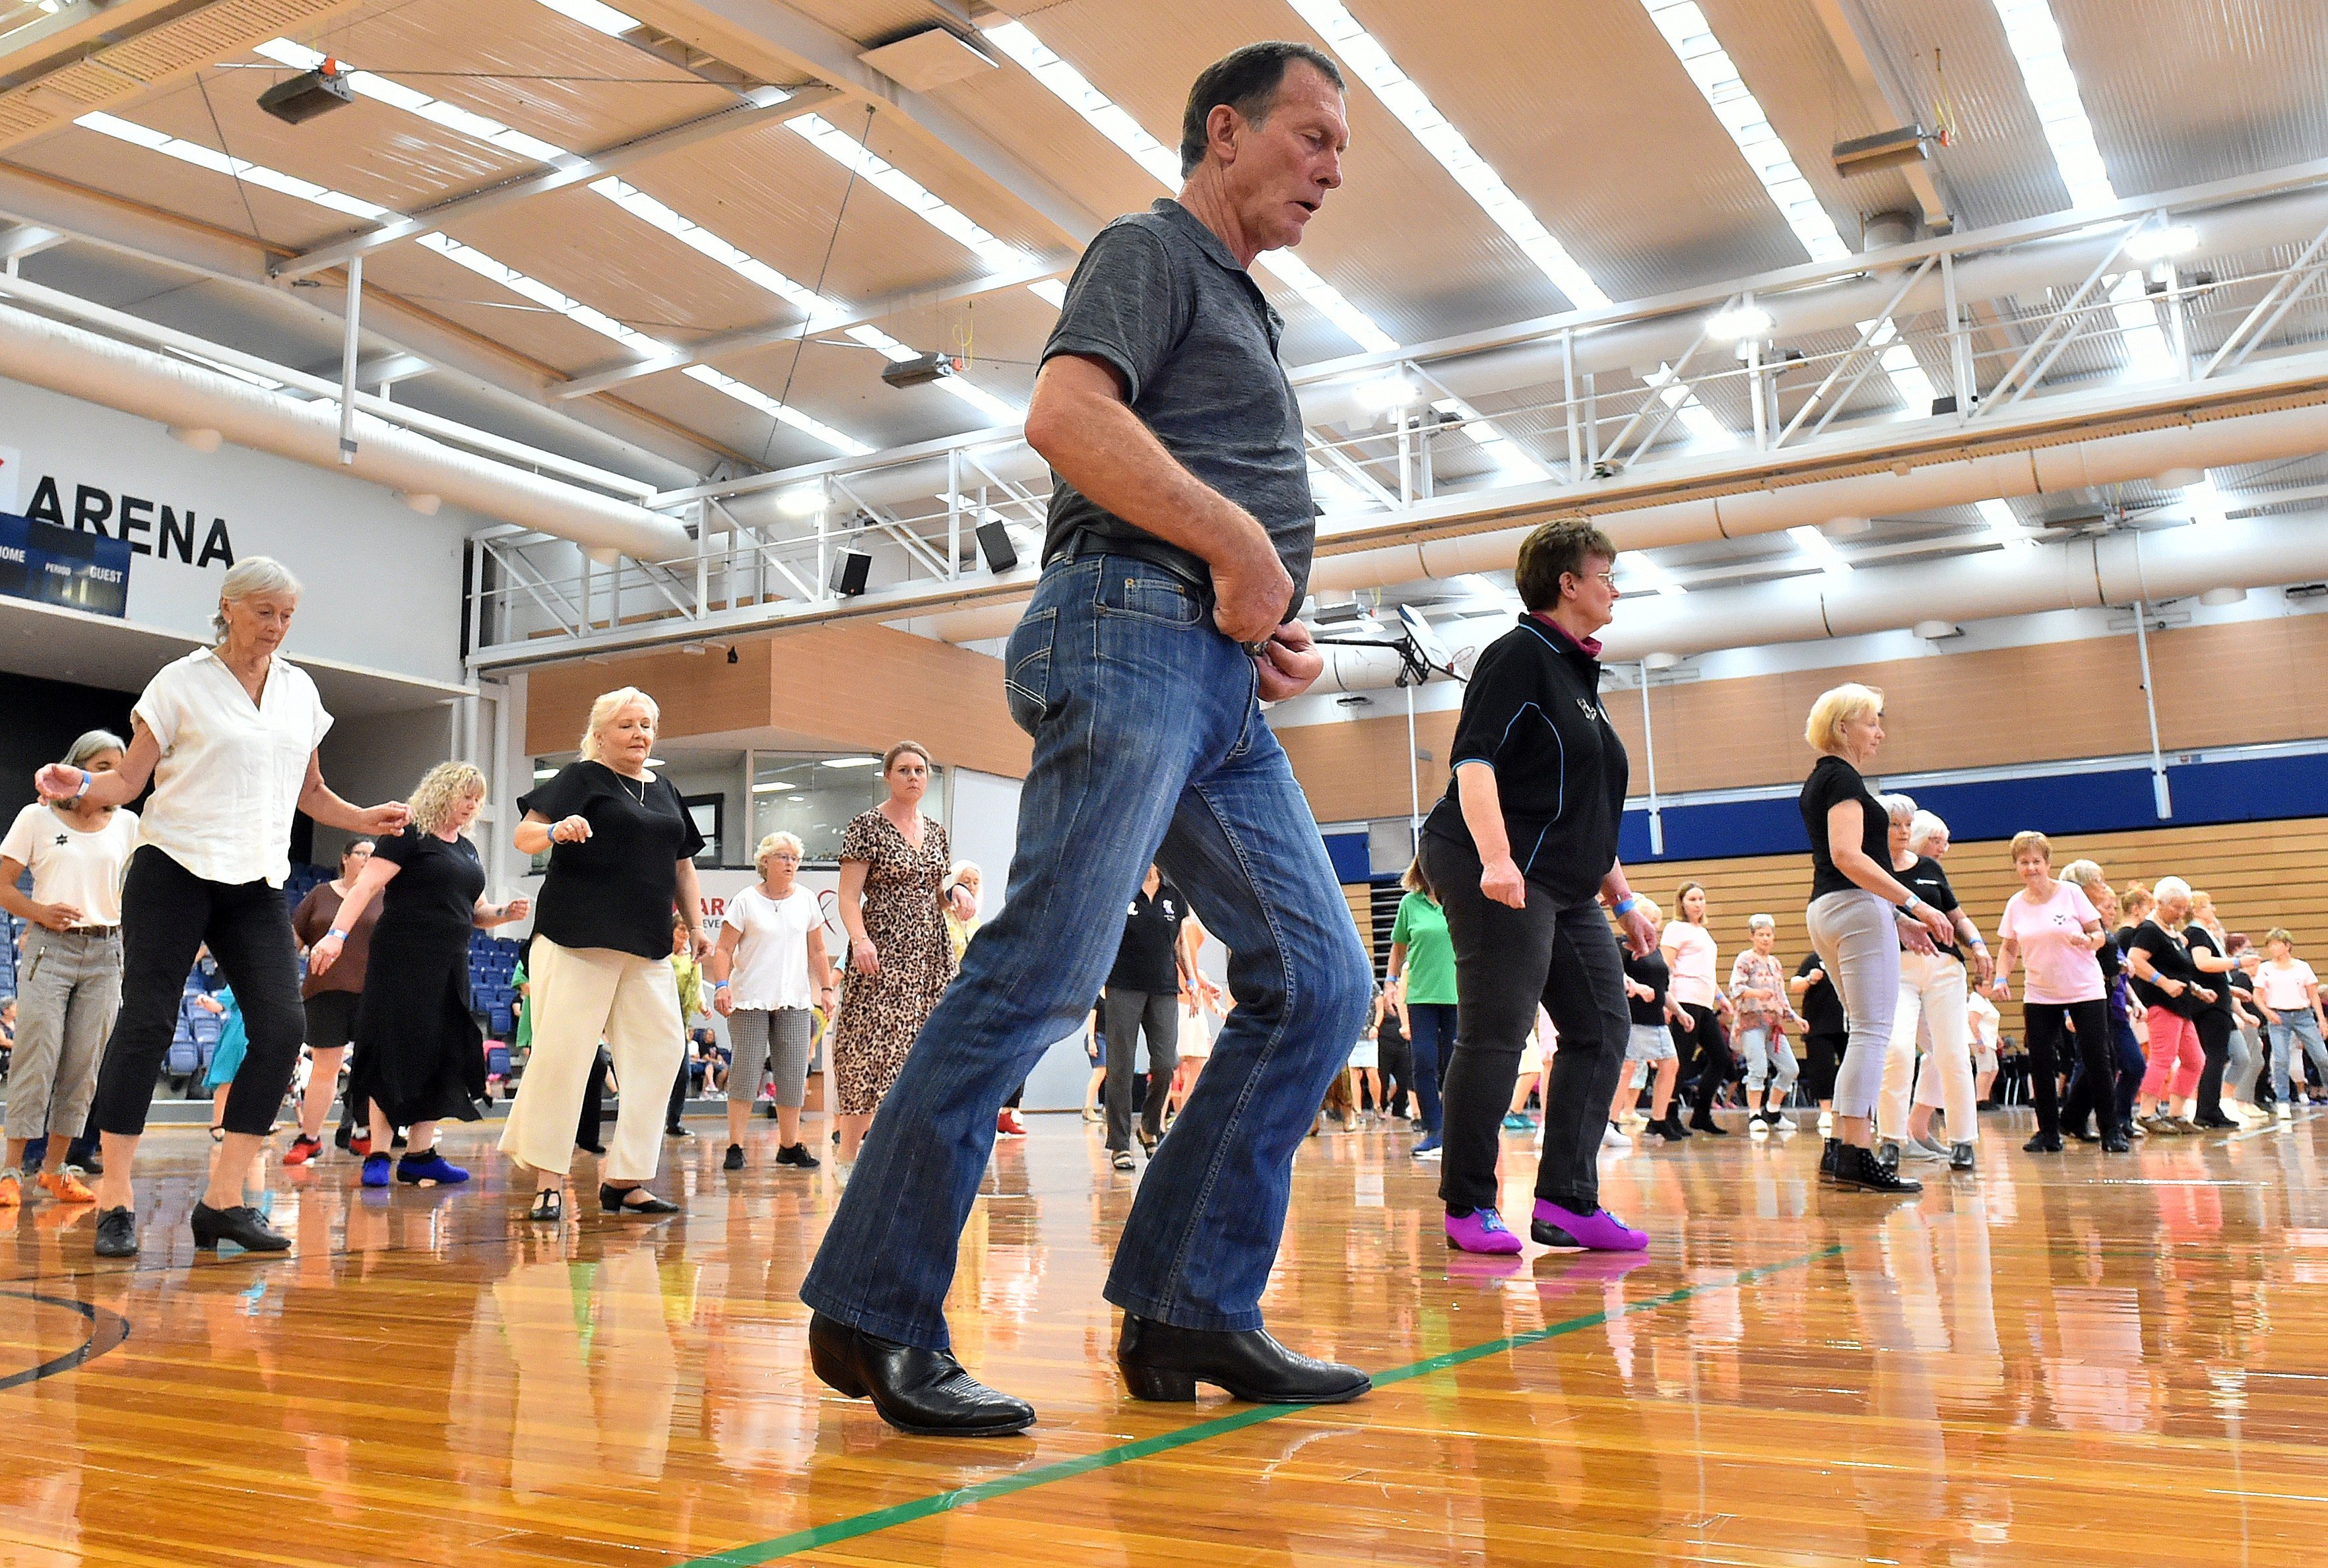 More than 300 line dancers strutted their stuff at the Edgar Centre in Dunedin over the weekend....